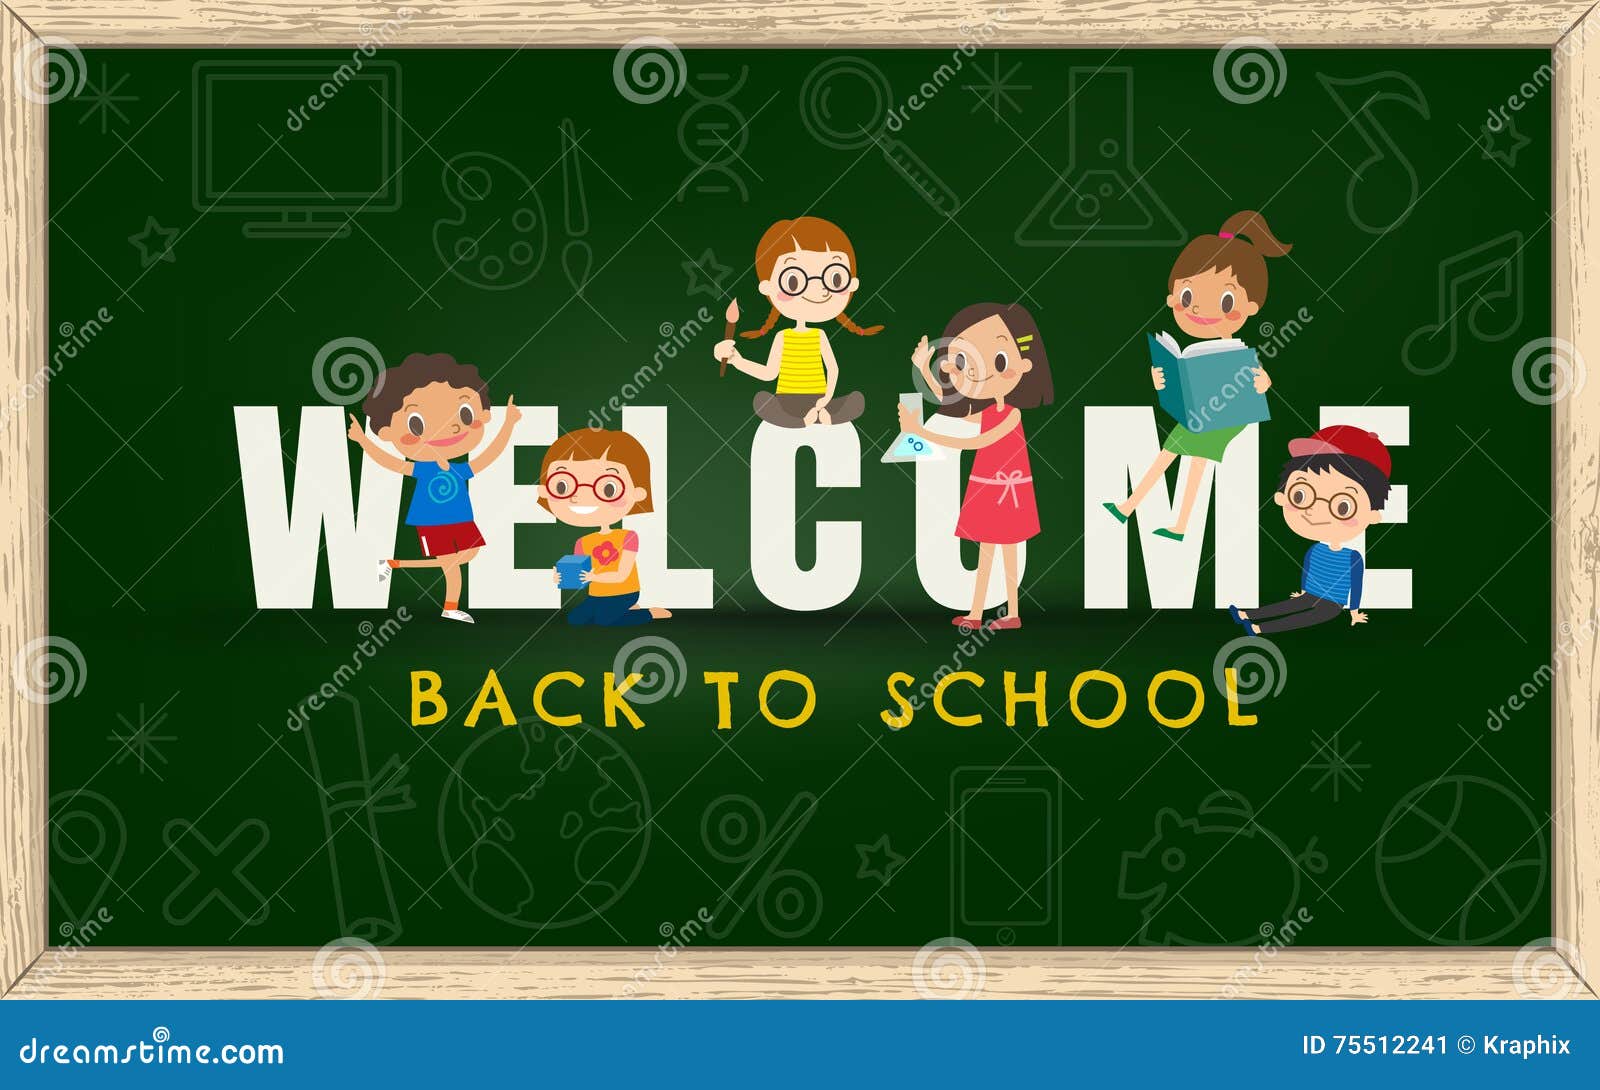 Back To School Background With Kids And Welcome Sign Stock Vector Illustration Of Background Green